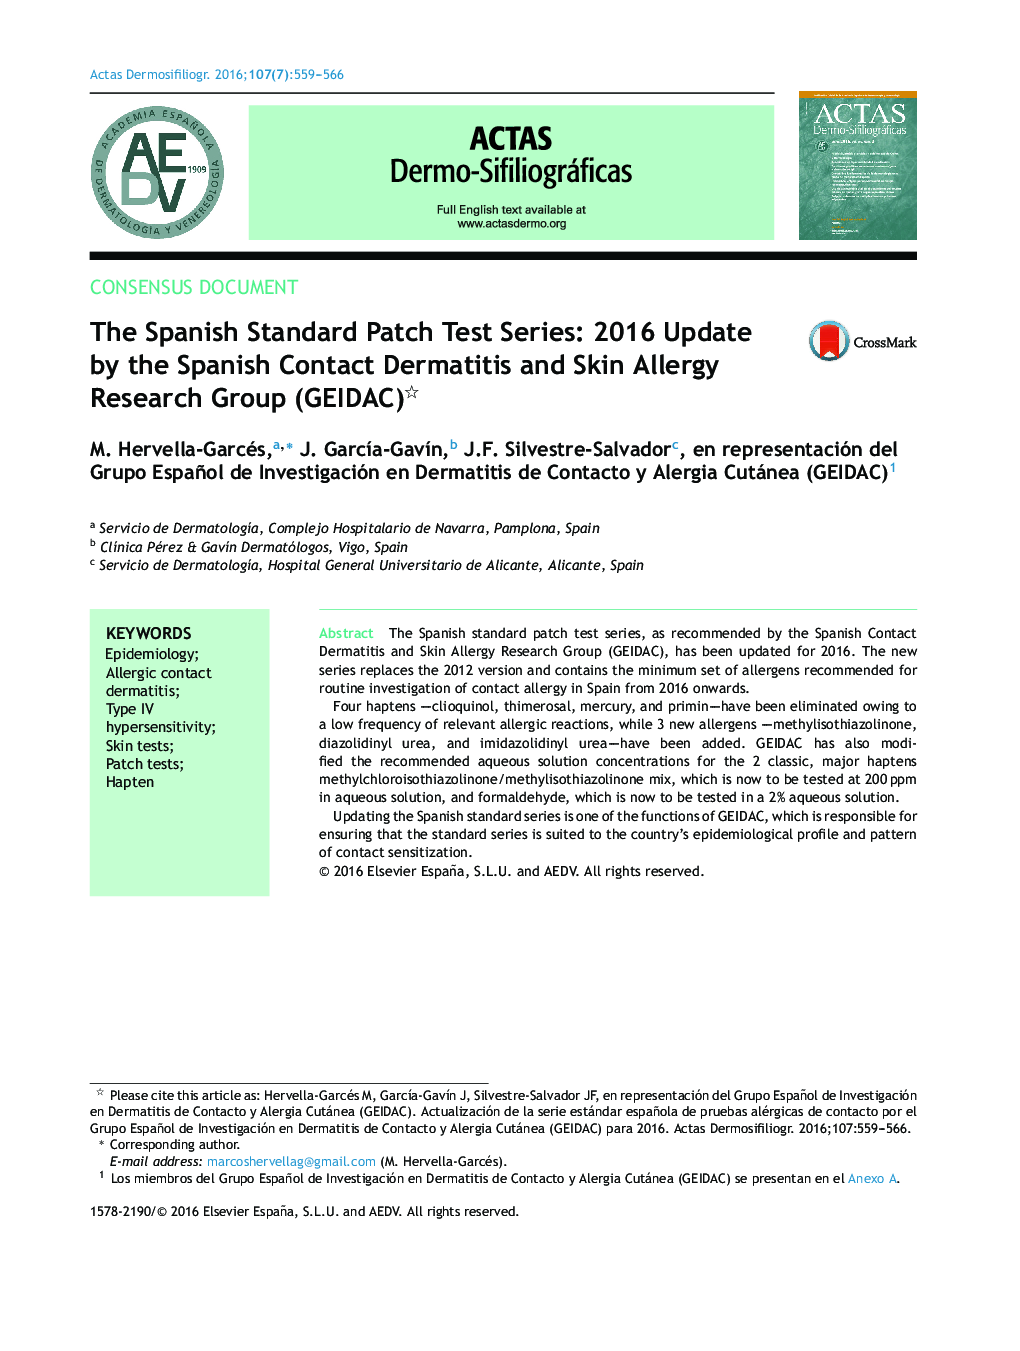 The Spanish Standard Patch Test Series: 2016 Update by the Spanish Contact Dermatitis and Skin Allergy Research Group (GEIDAC) 